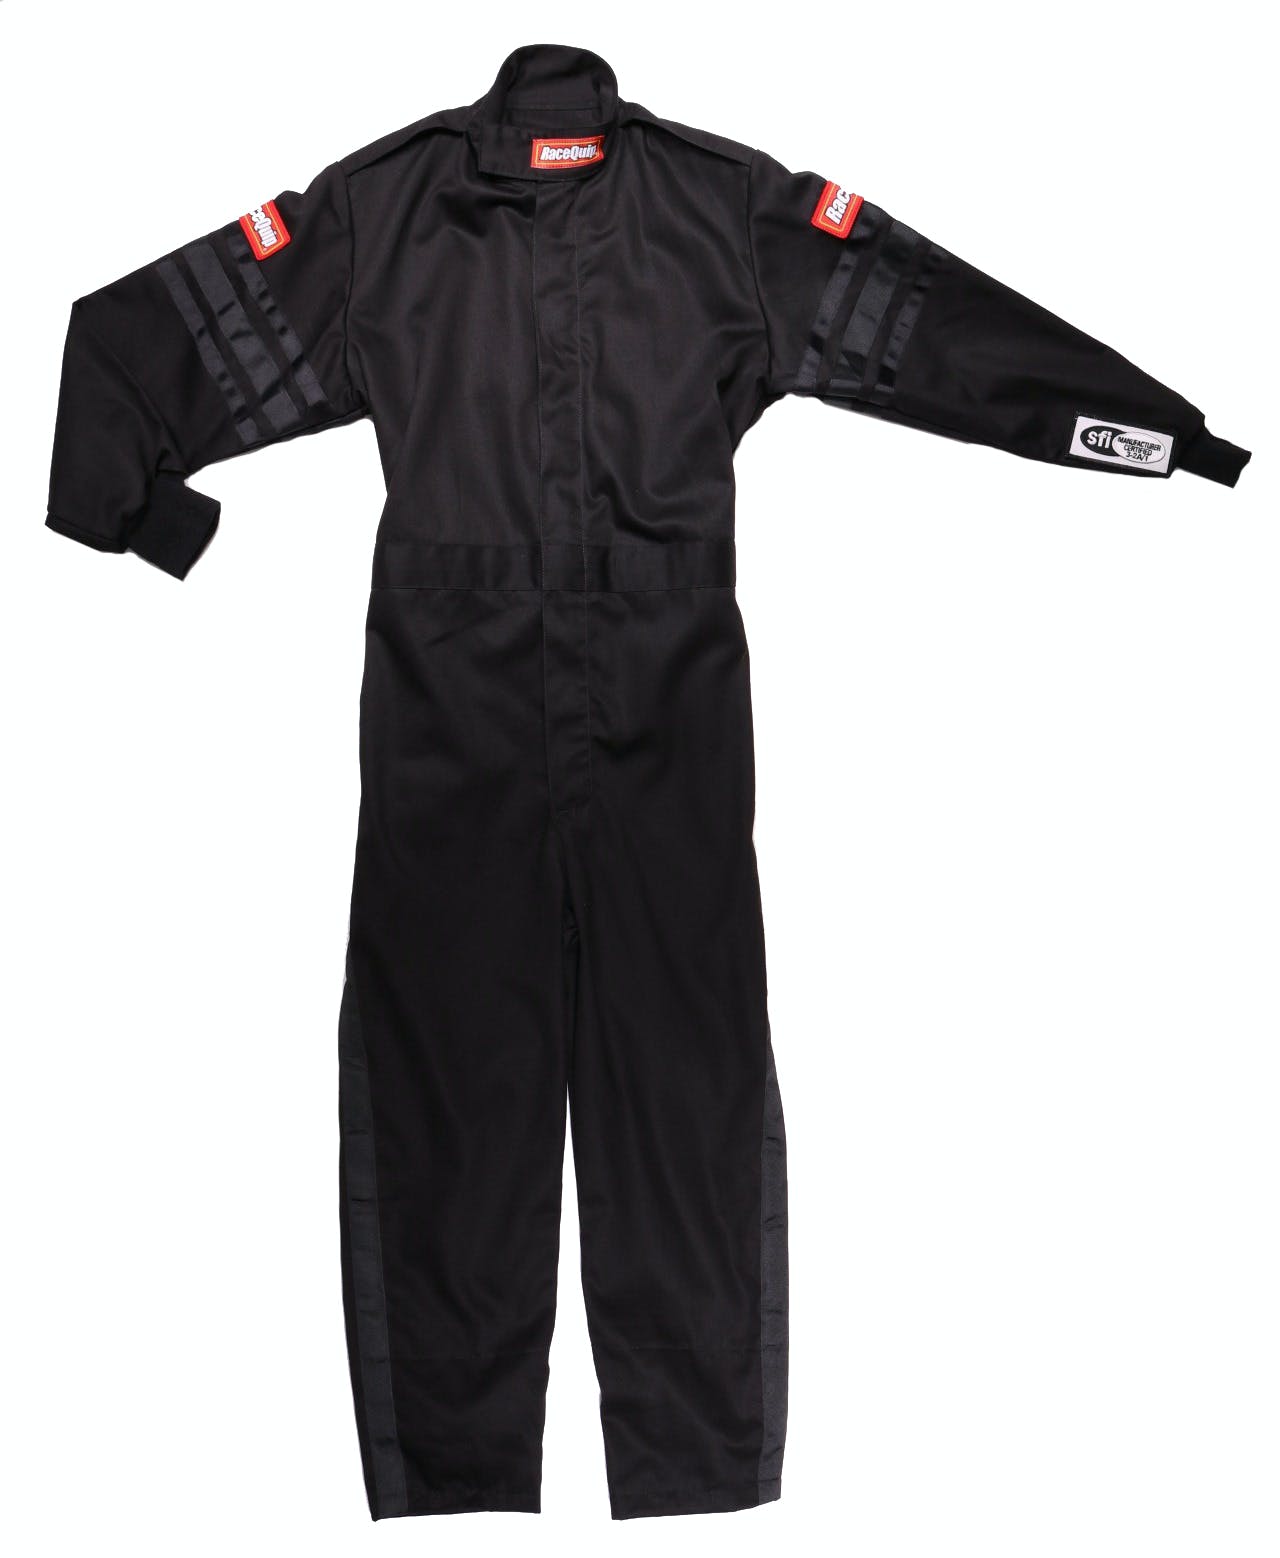 RaceQuip 1959995 SFI-1 Pyrovatex One-Piece Single-Layer Youth Racing Fire Suit (Black/Blue-L)